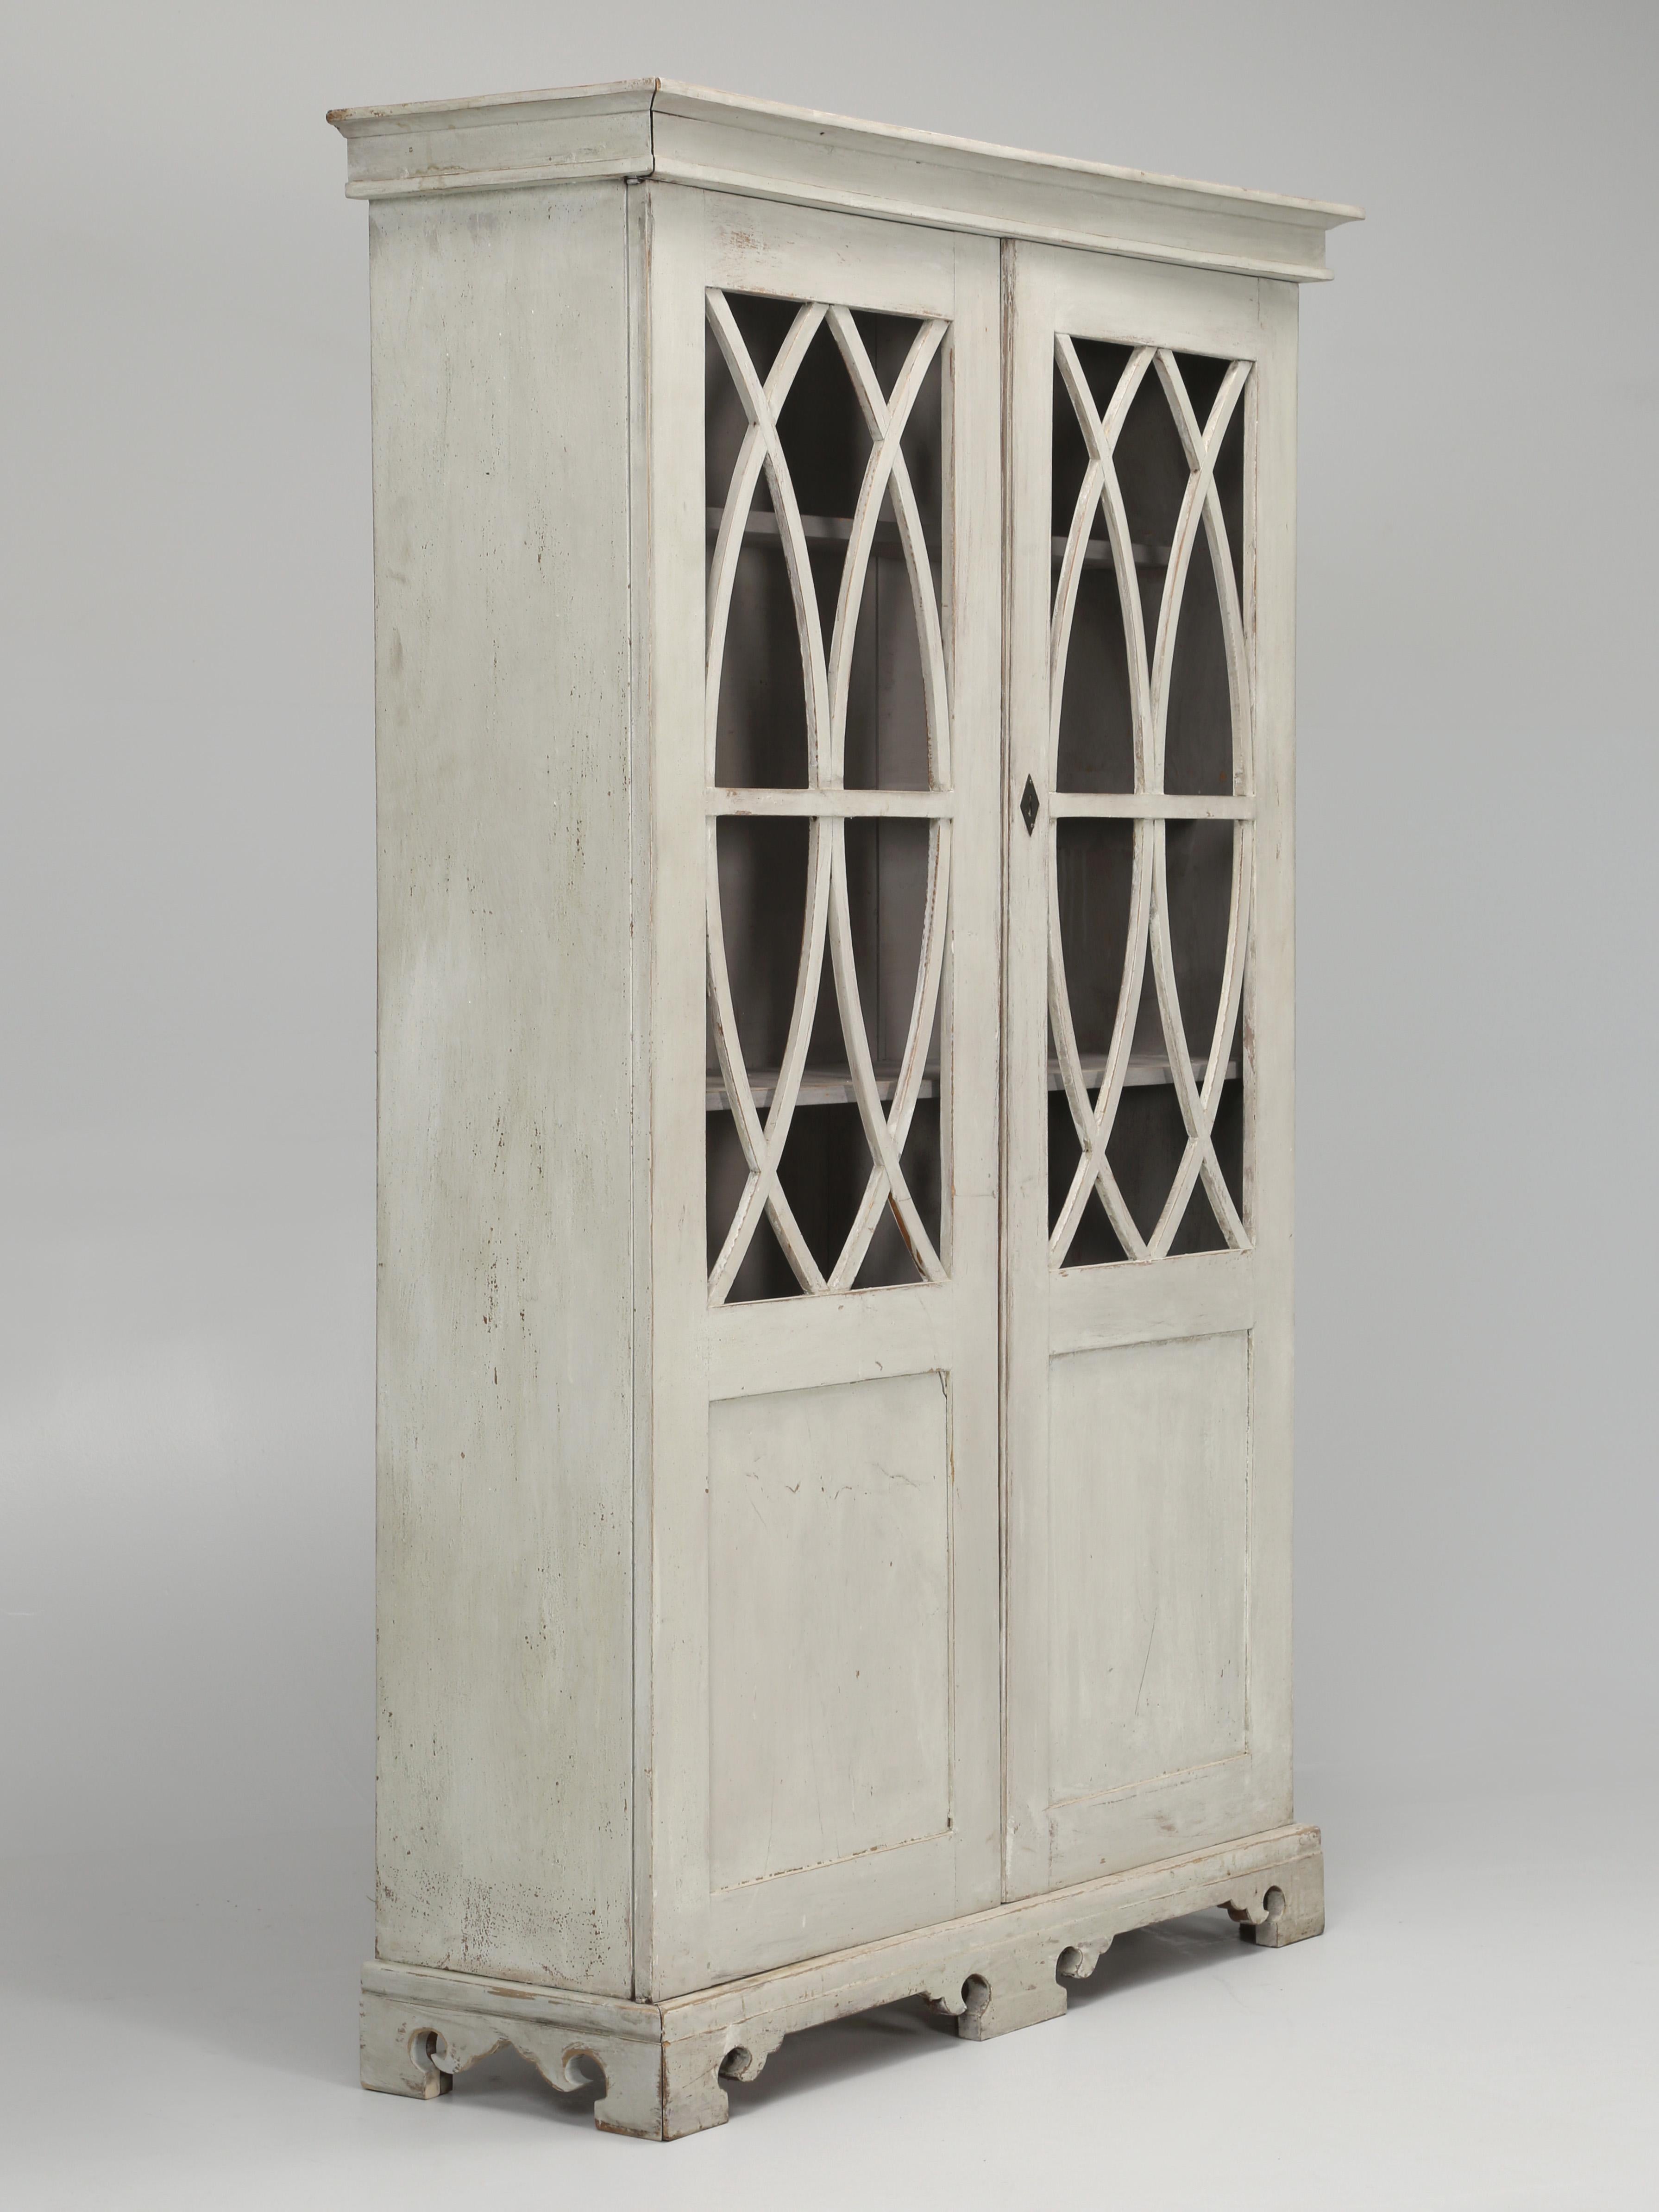 English Antique Bookcase or Display Cabinet with Enhanced Recent Paint